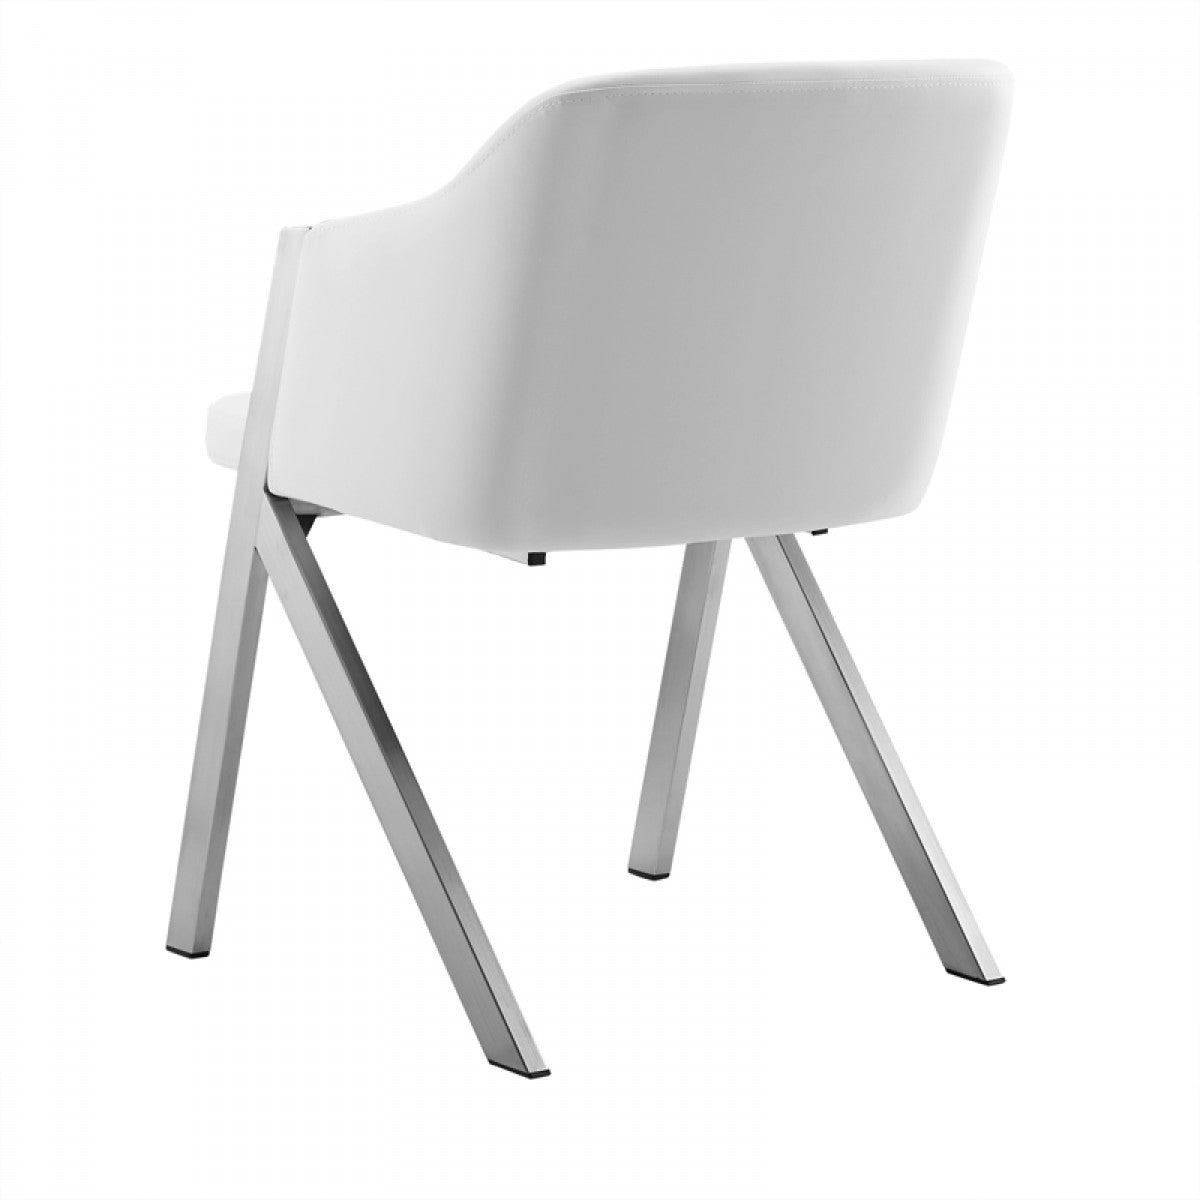 Modrest Darcy Modern White Leatherette Dining Chair (Set of 2)